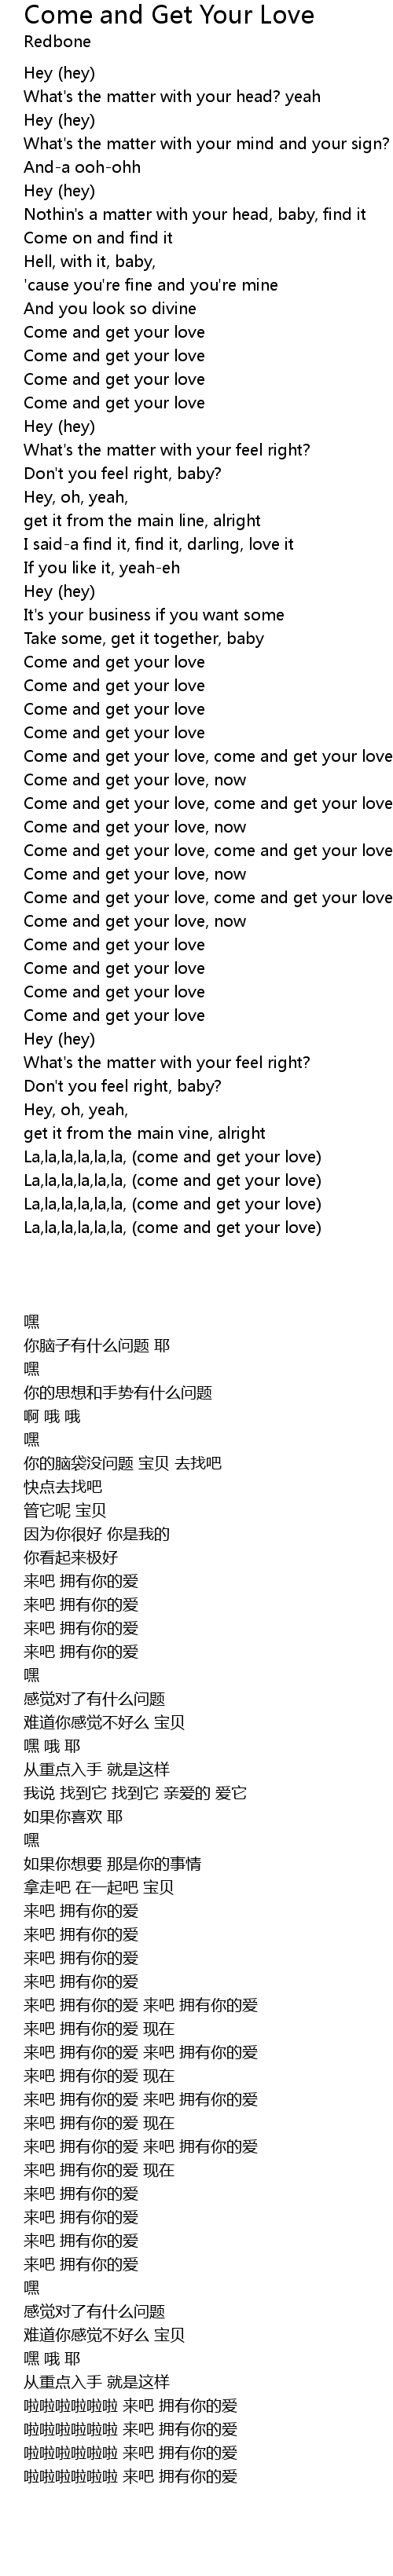 Come and Get Your Love Lyrics